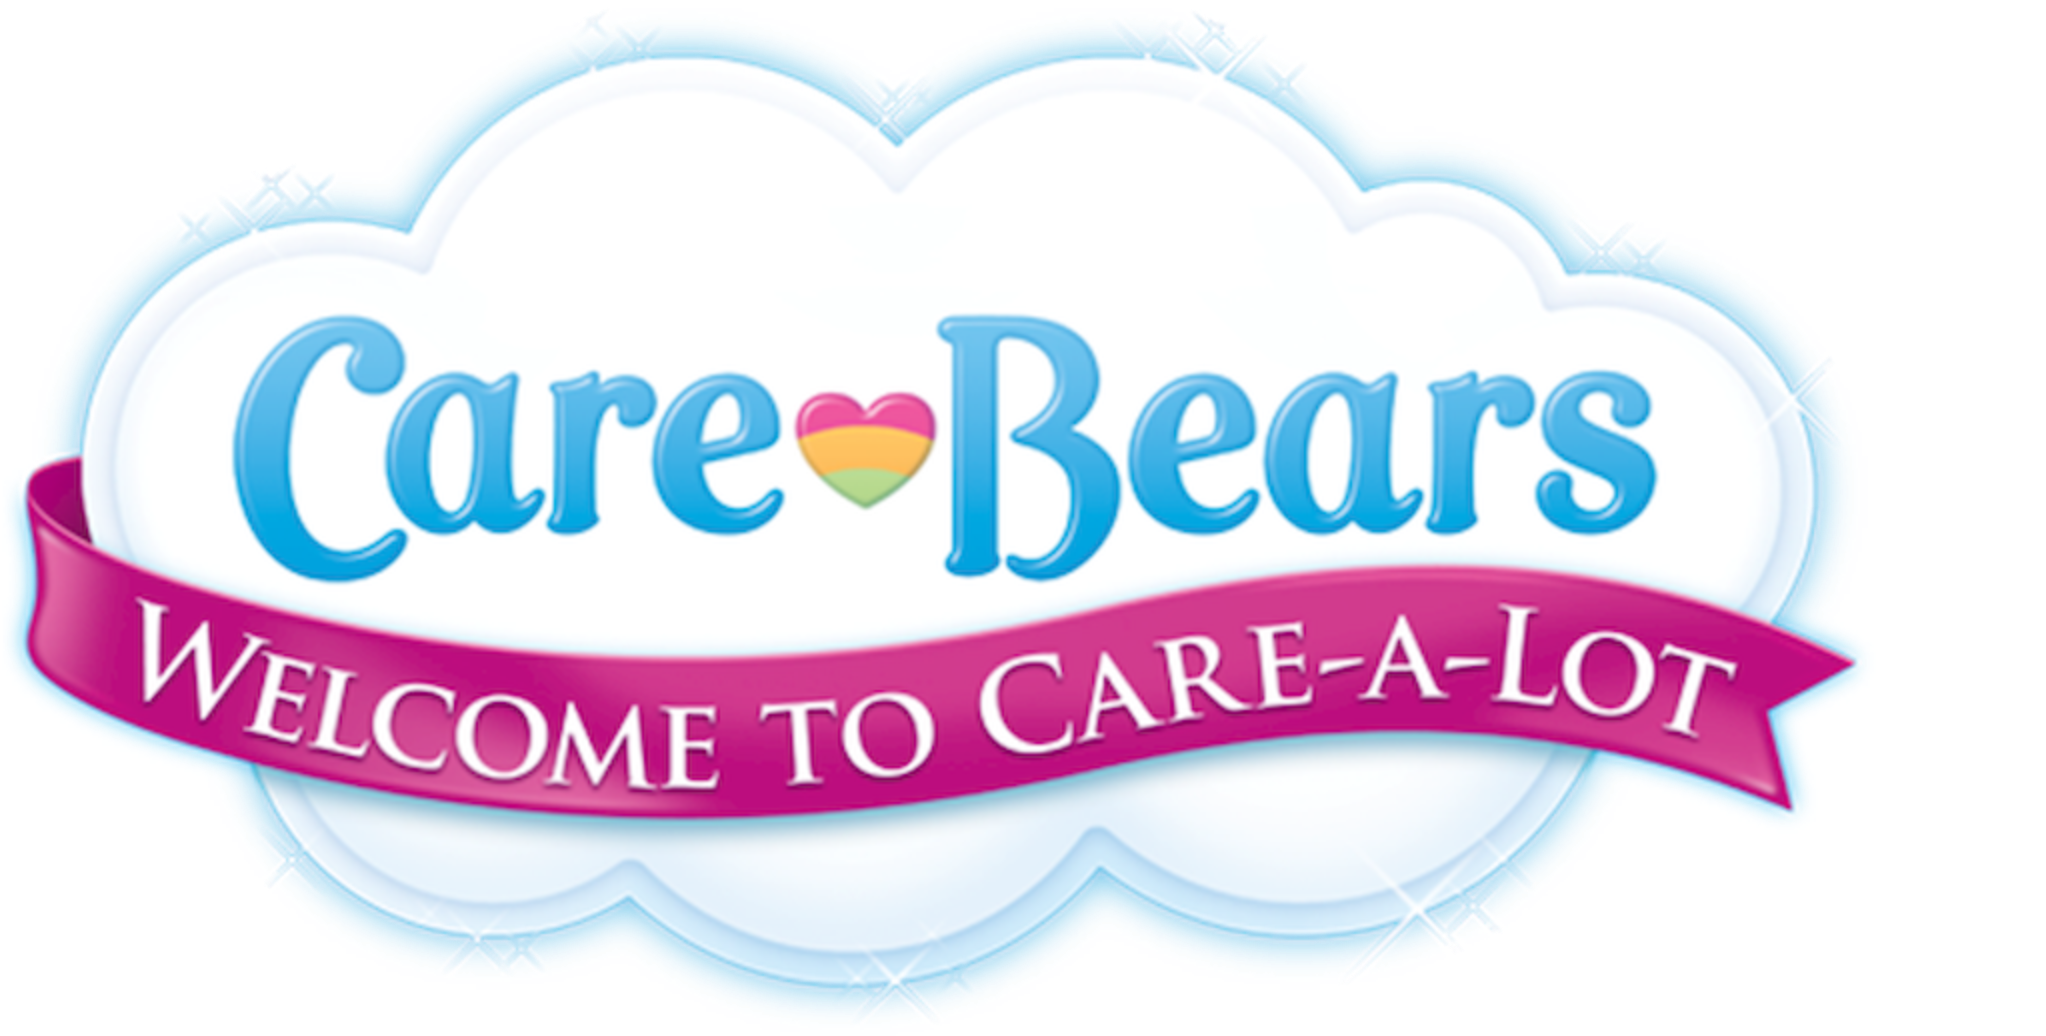 Care Bears: Welcome to Care-a-Lot (1 DVD Box Set)